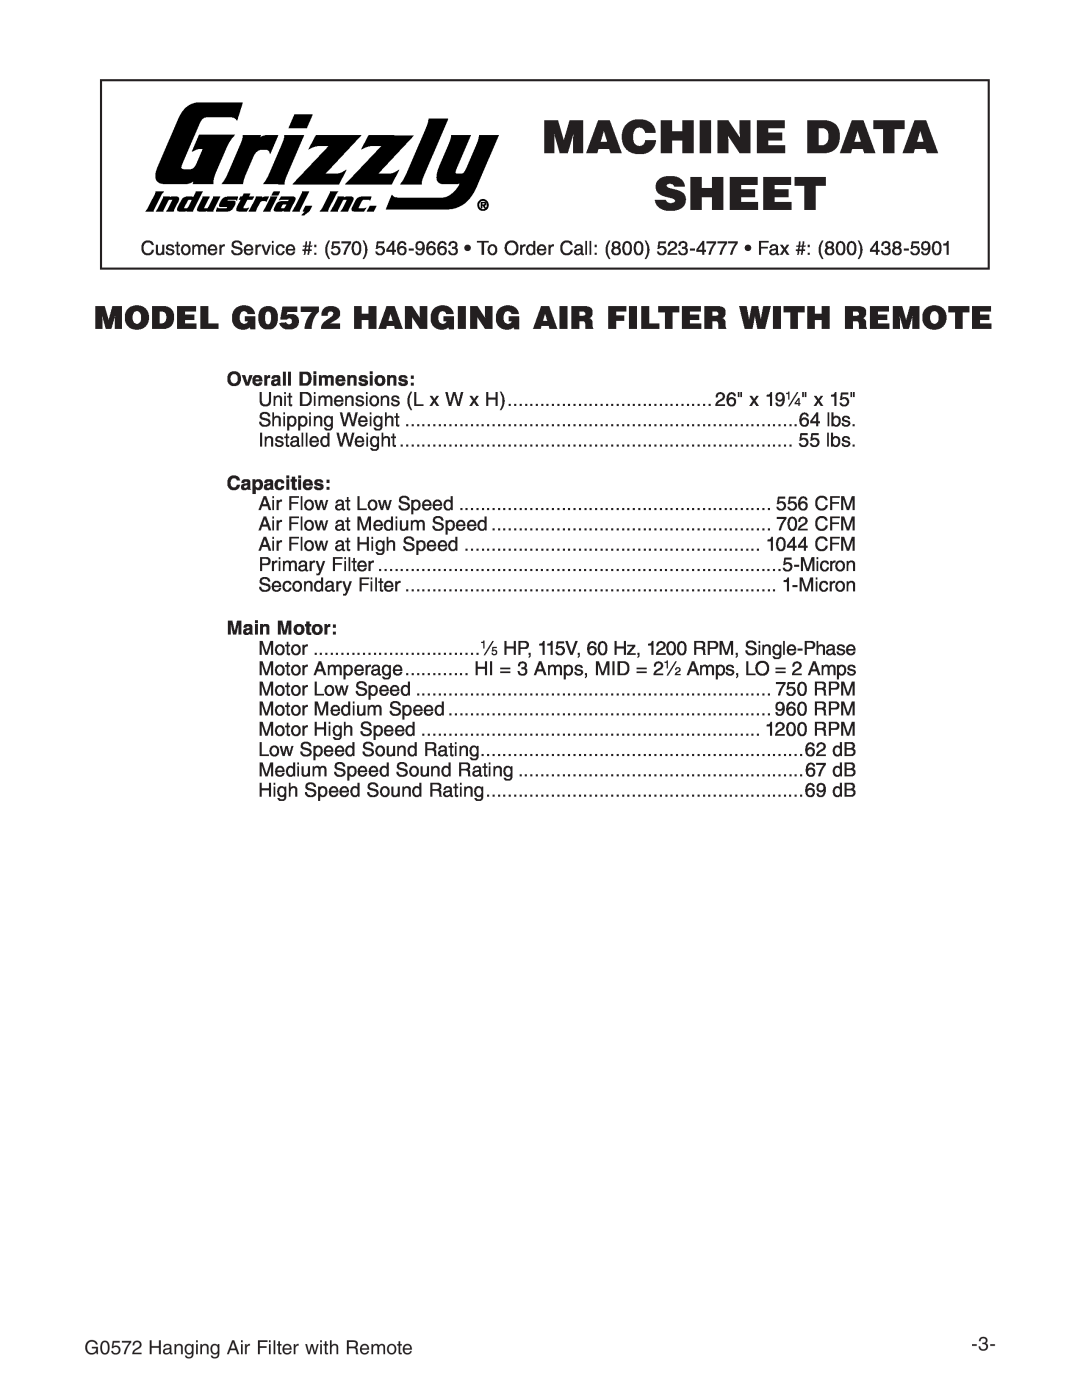 Grizzly instruction manual MODEL G0572 HANGING AIR FILTER WITH REMOTE, Machine Data Sheet 